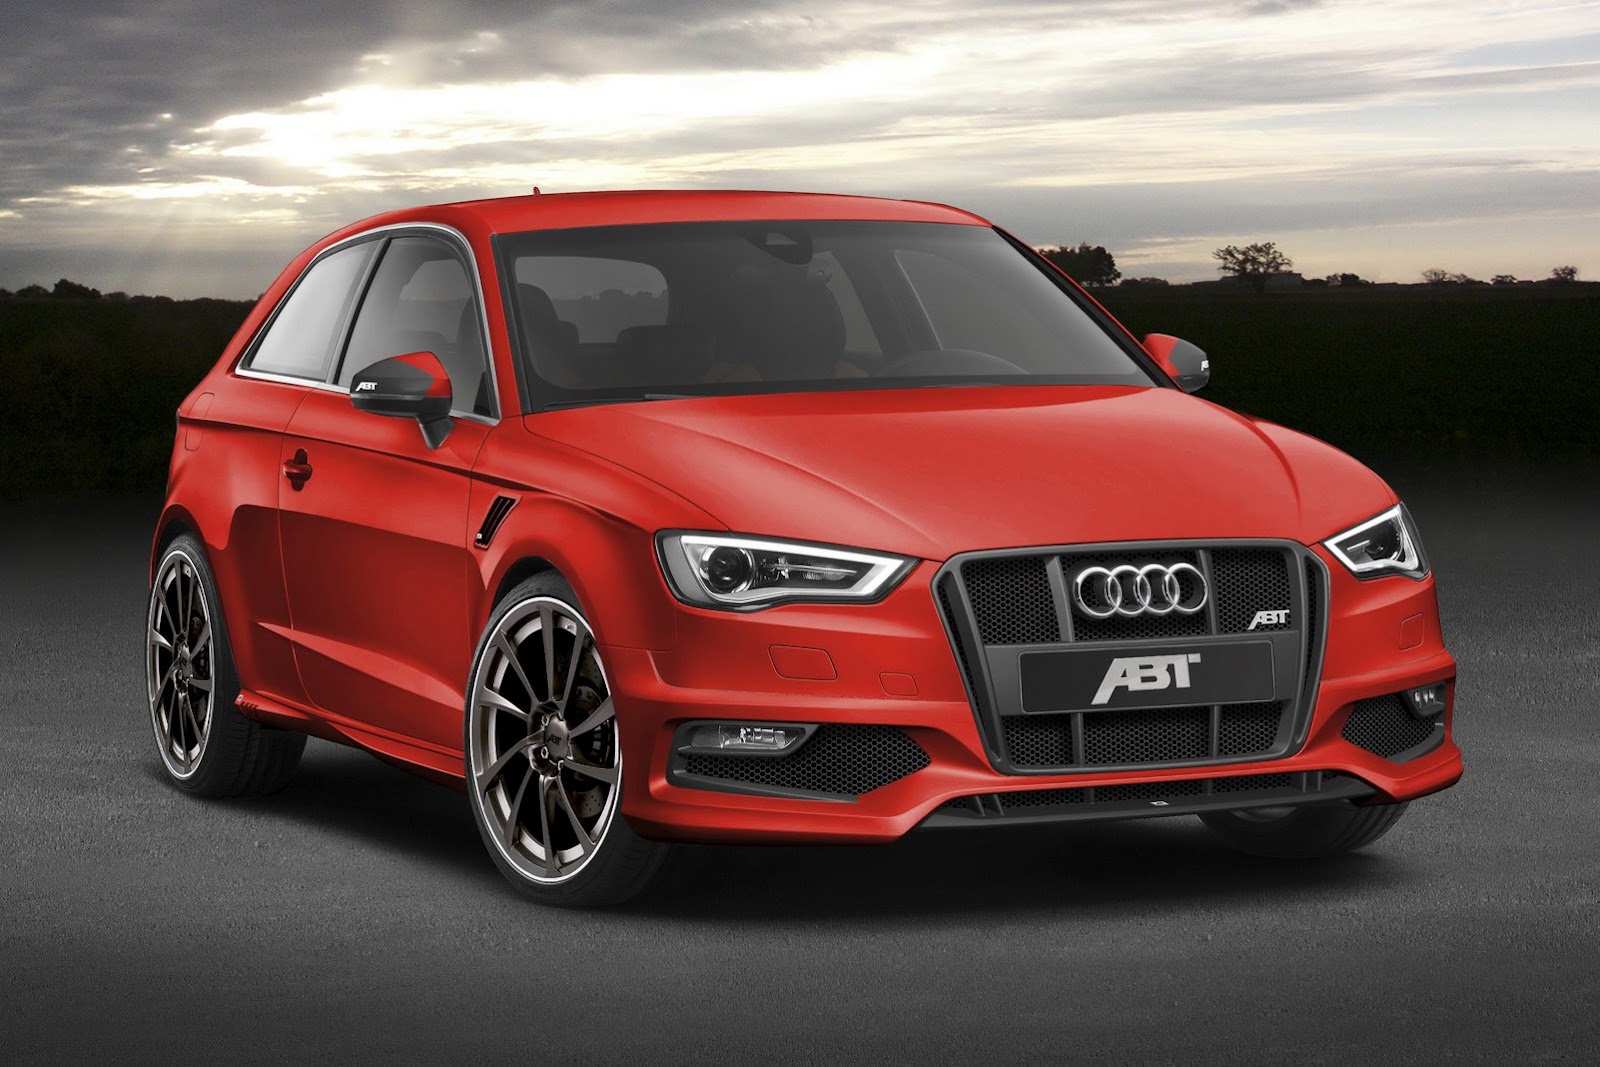 ABT Sportsline previews new Audi A3 tuning kit